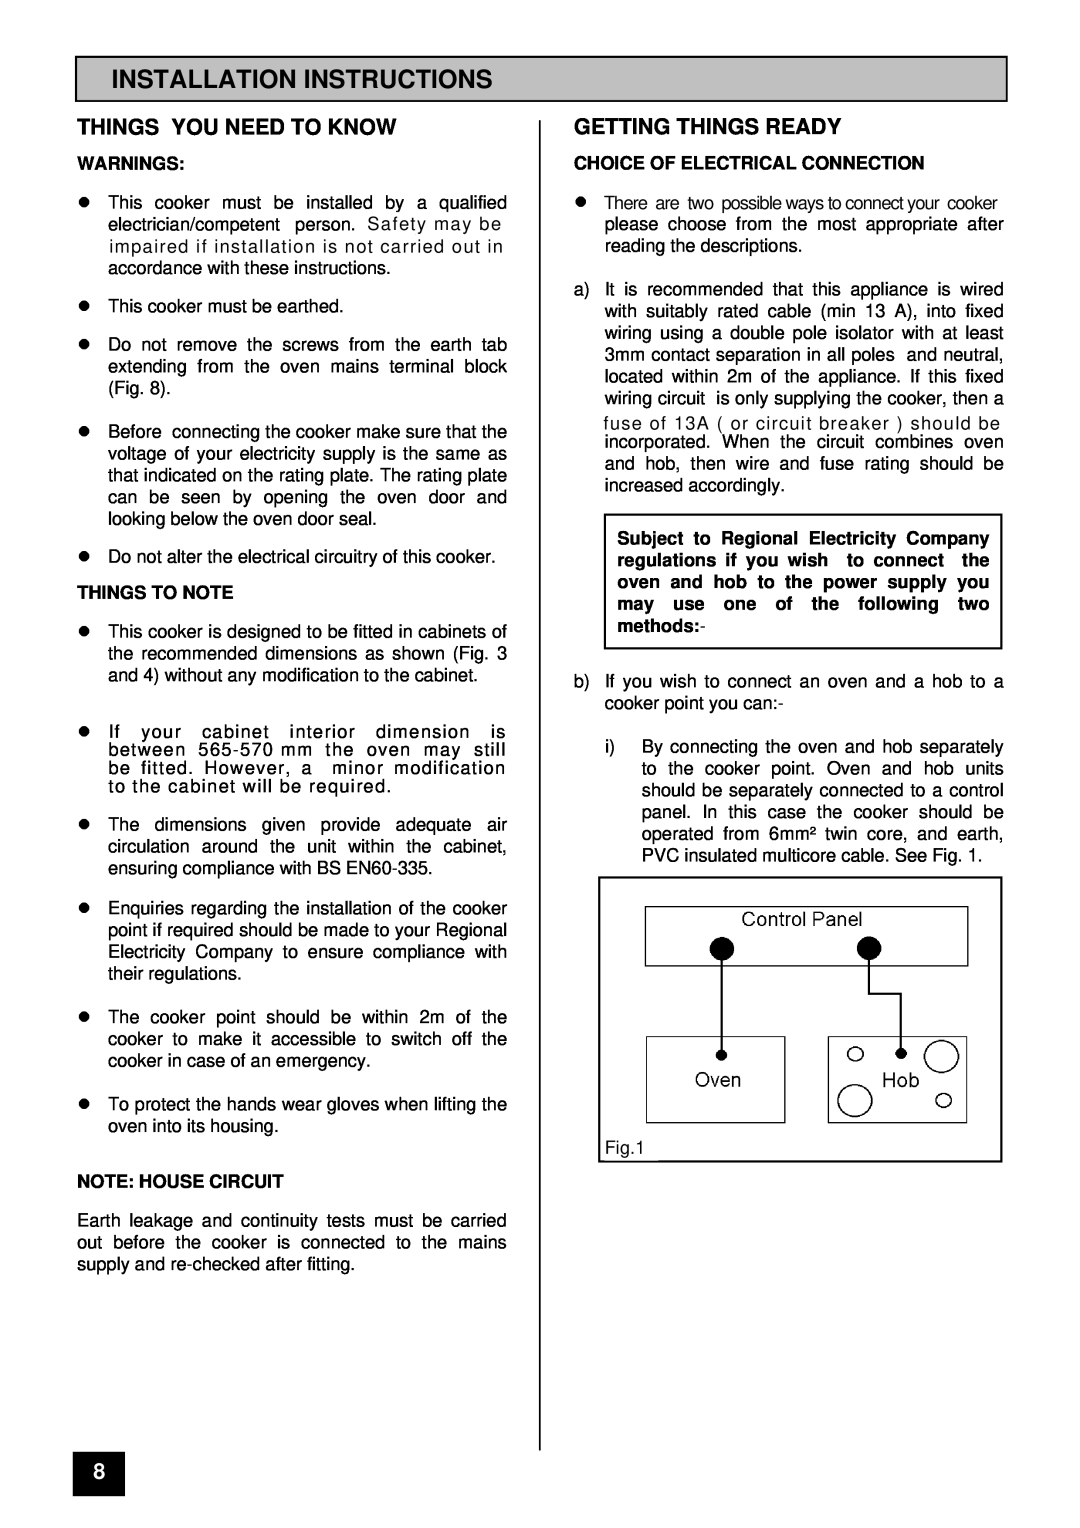 Tricity Bendix BS 600 Installation Instructions, Things You Need To Know, Getting Things Ready, Warnings, Things To Note 